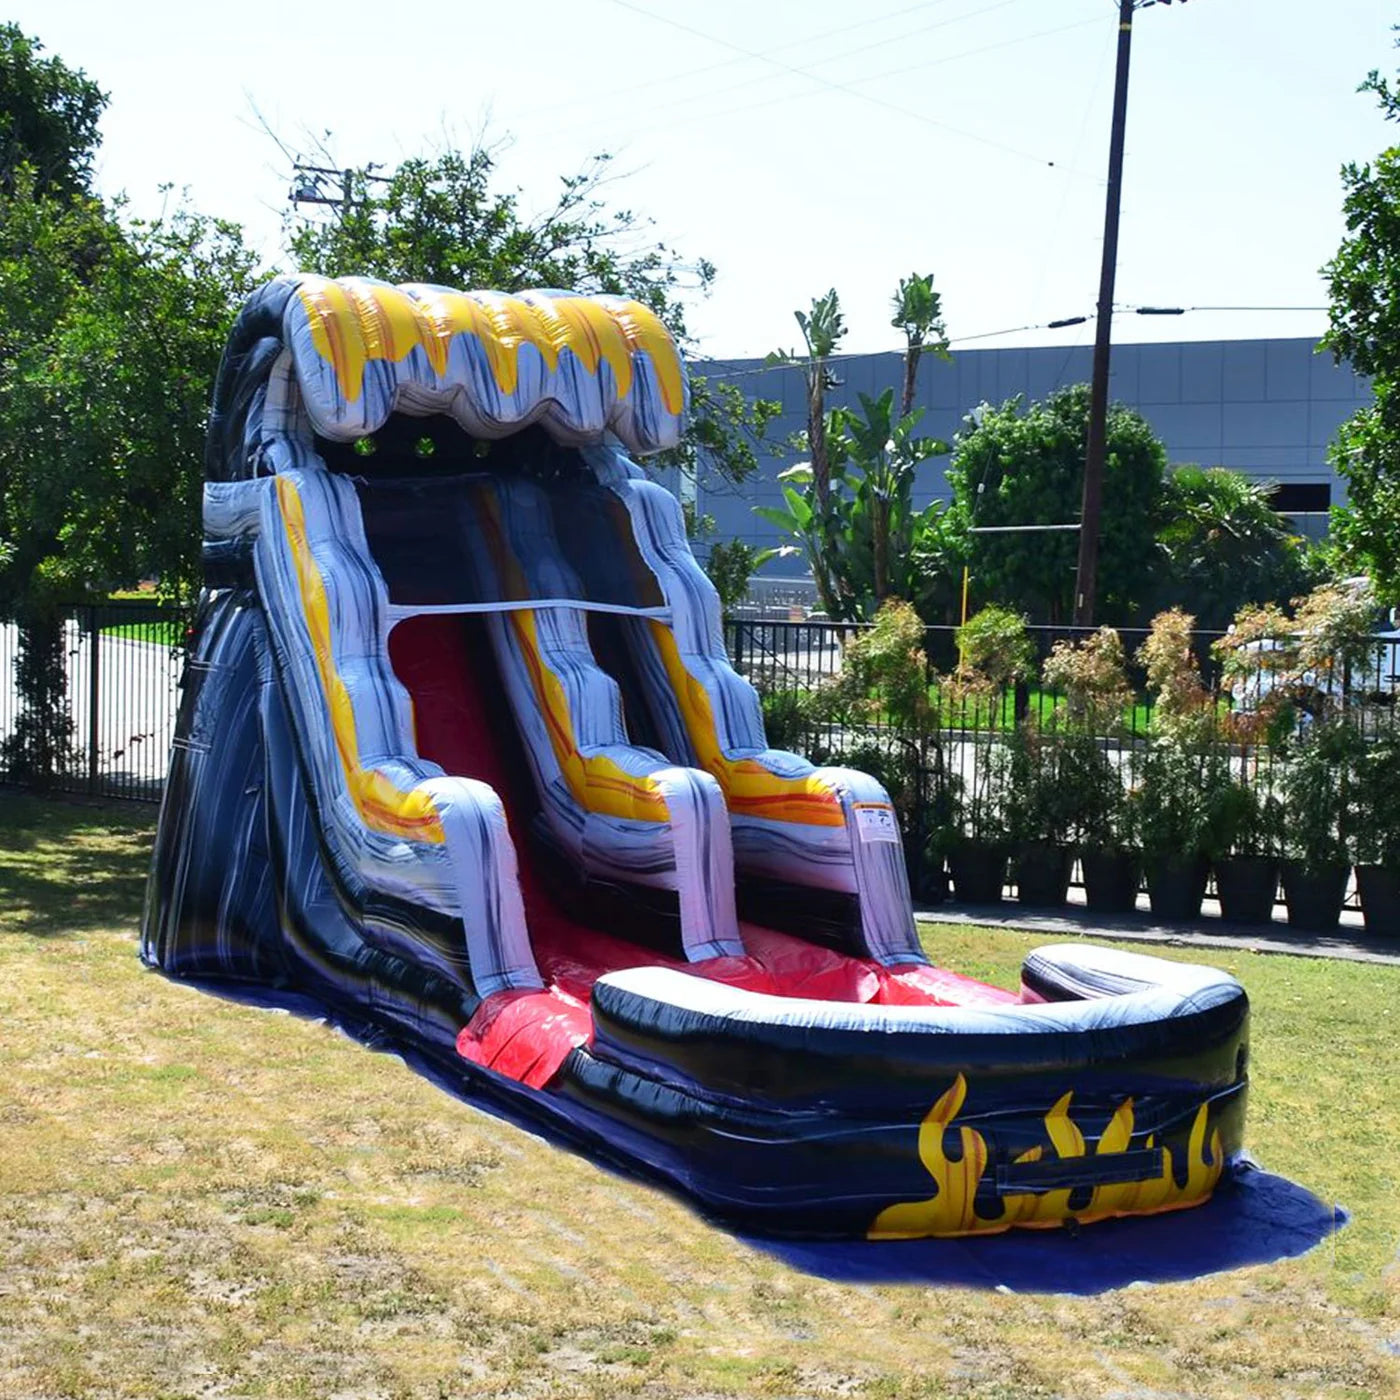 Capitalize on Fun: Launch Your Side Hustle with 15 Ft Inflatable Water Slide Business Opportunities